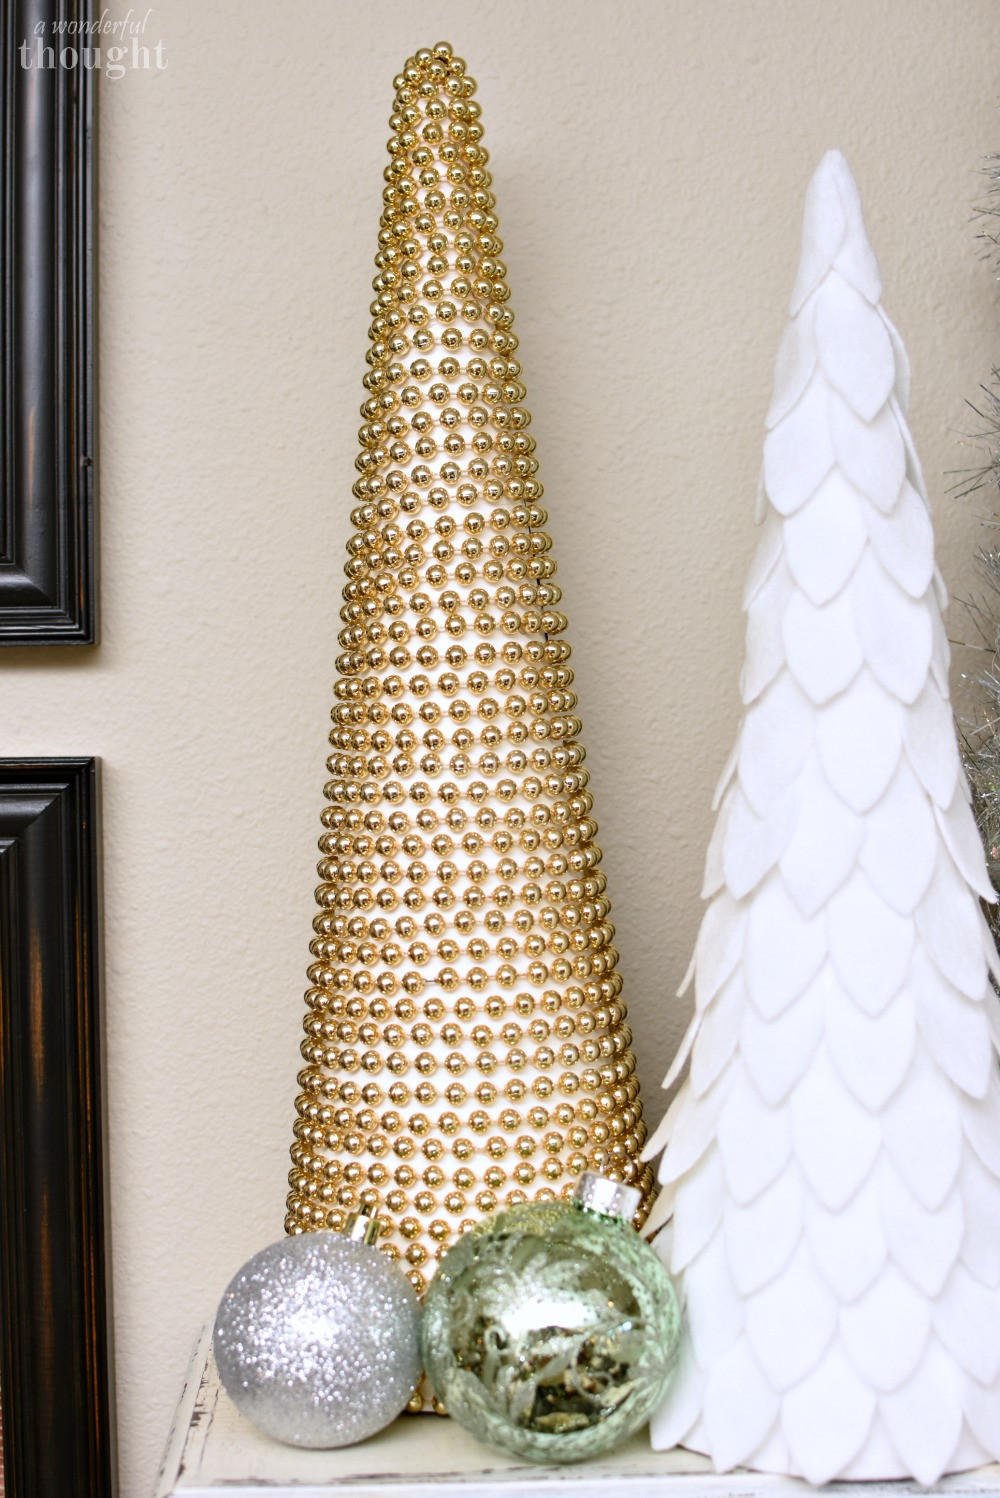 DIY Christmas Tree Cone
 DIY Cone Christmas Trees A Wonderful Thought